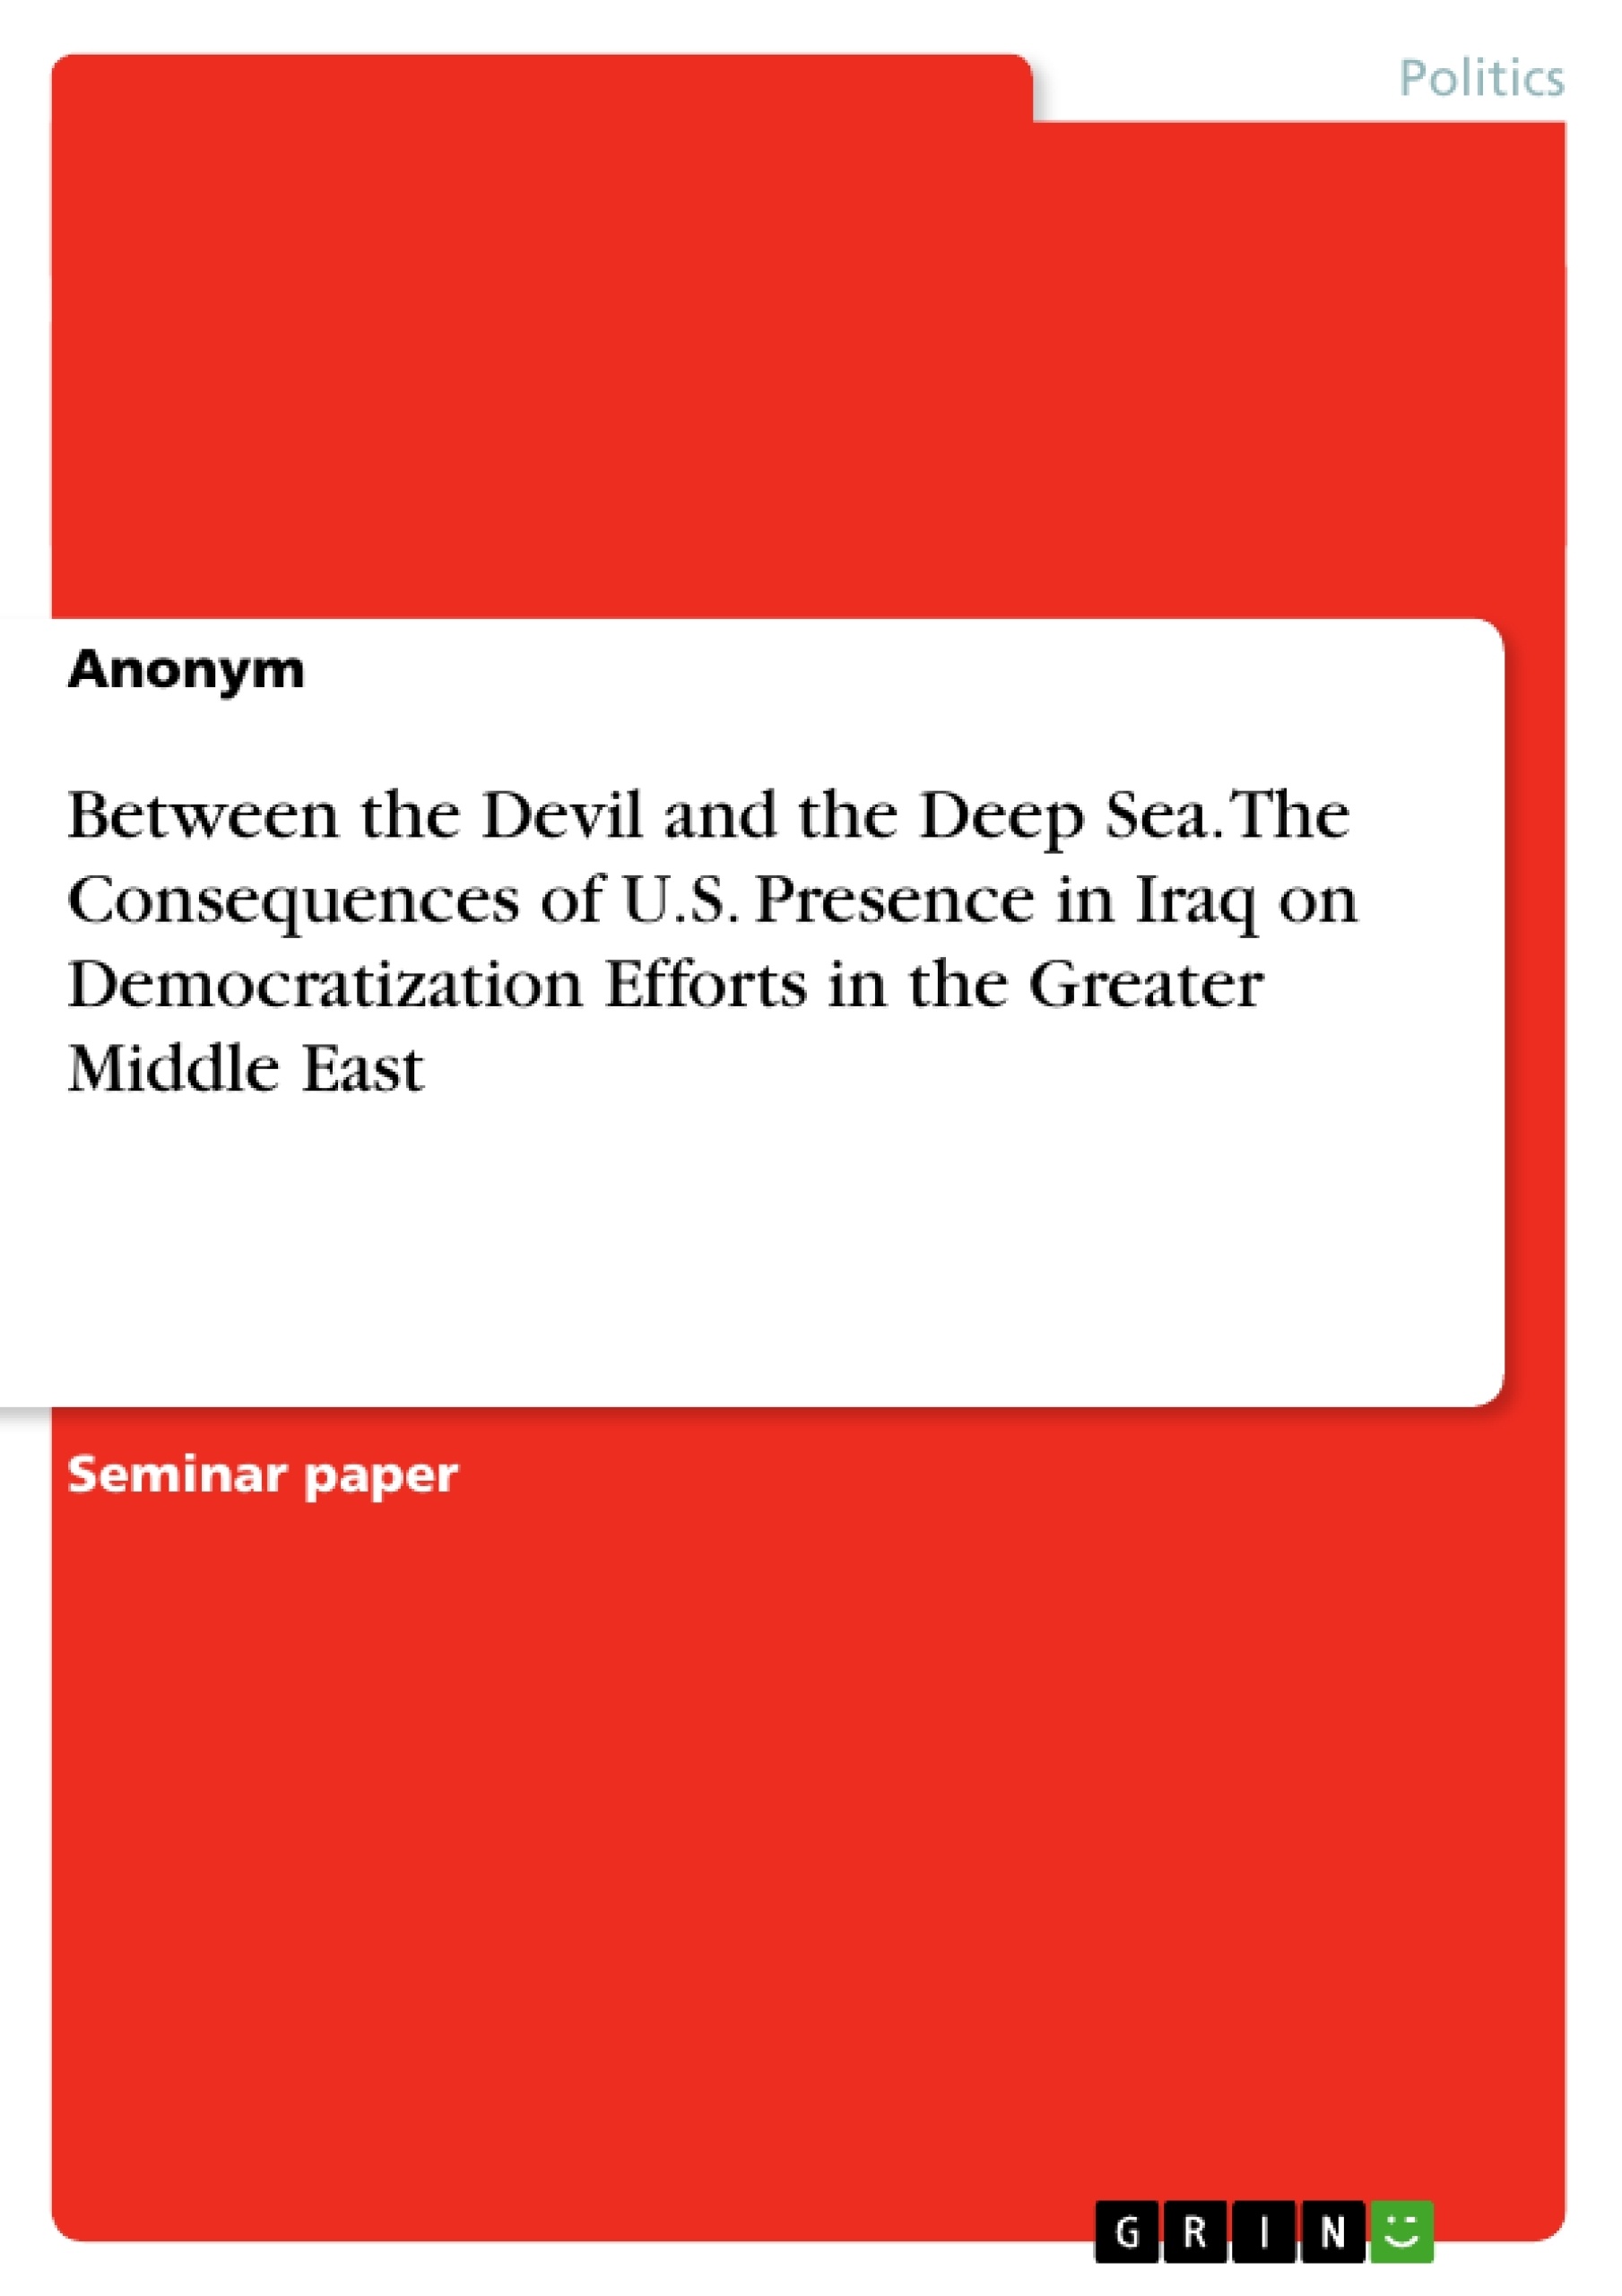 Title: Between the Devil and the Deep Sea. The Consequences of U.S. Presence in Iraq on Democratization Efforts in the Greater Middle East